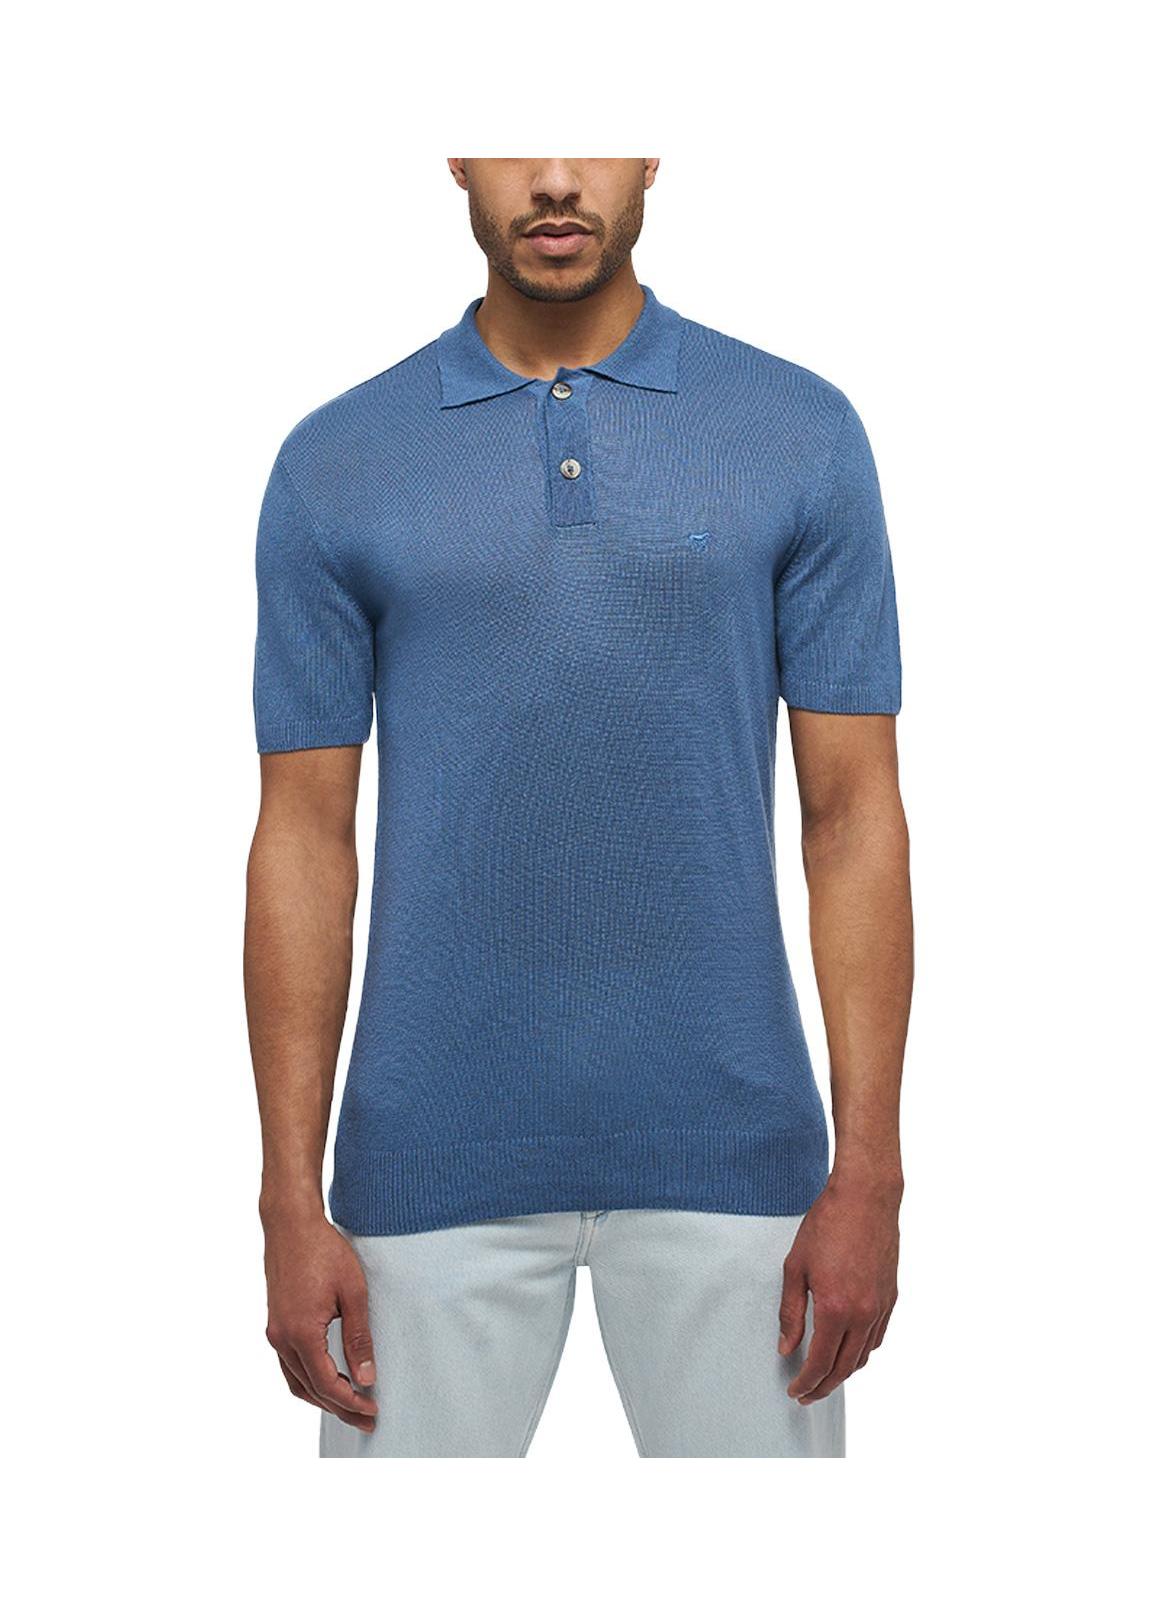 Mustang® Style Emil C Polo - Moonlight Blue